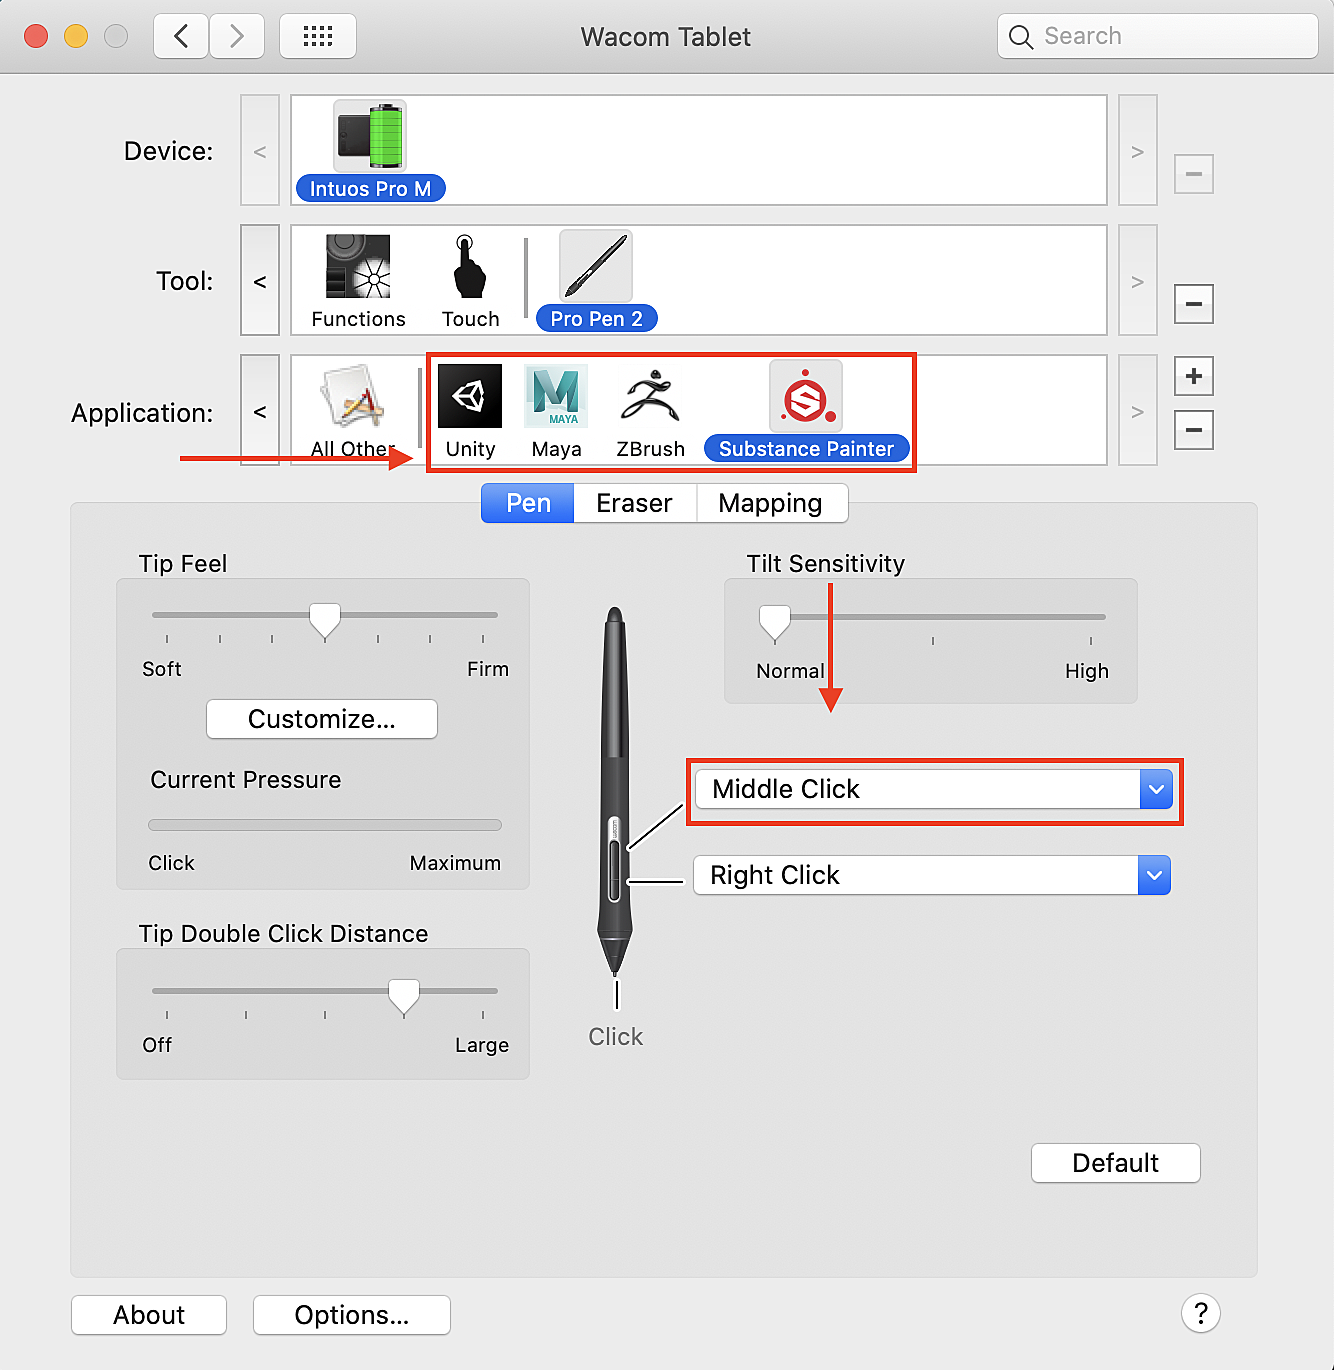 MacOS System Setting for Wacom Tablet